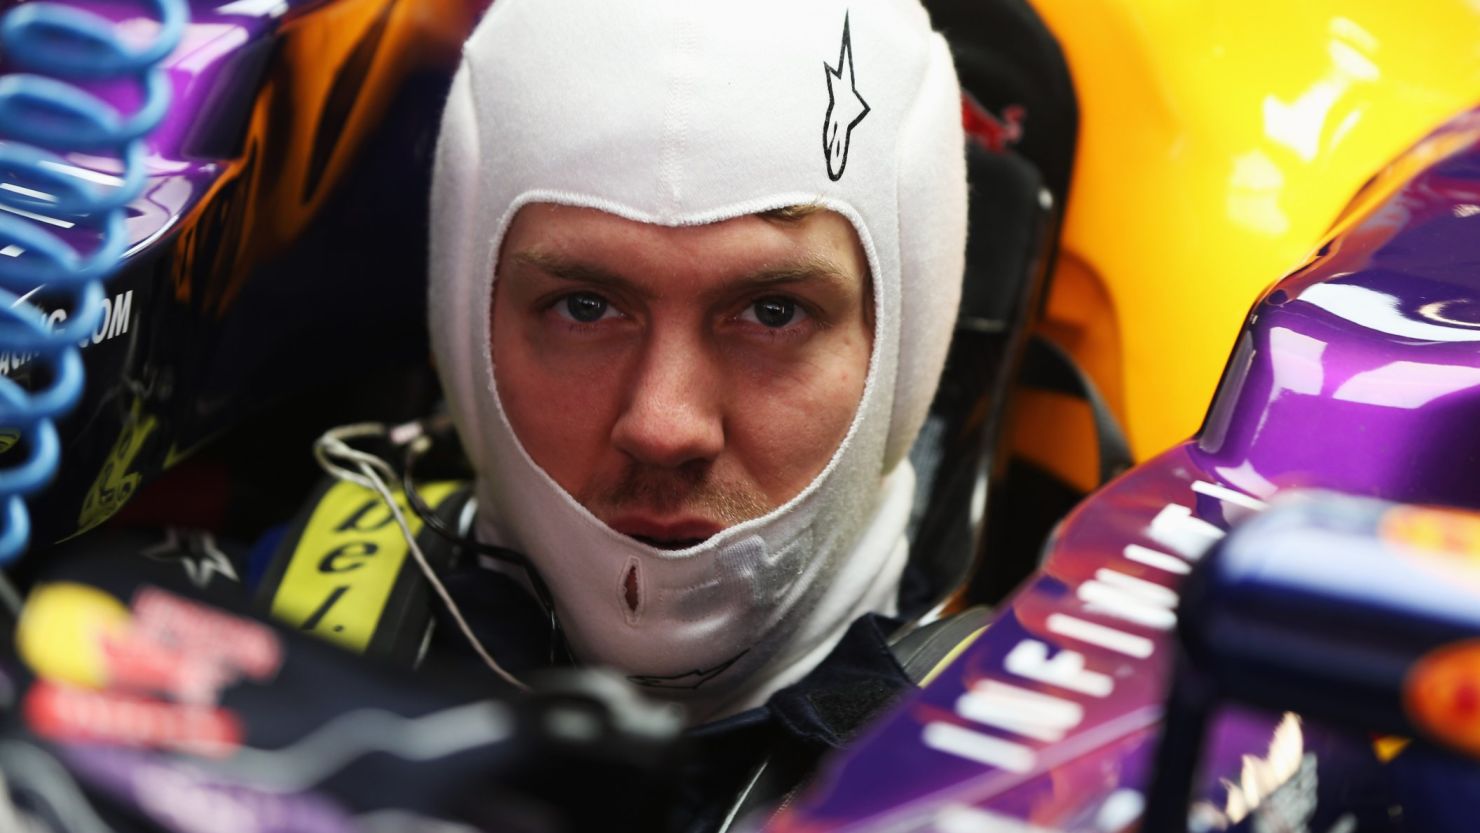 Red Bull driver Sebastian Vettel is the youngest triple world champion in Formula One history.